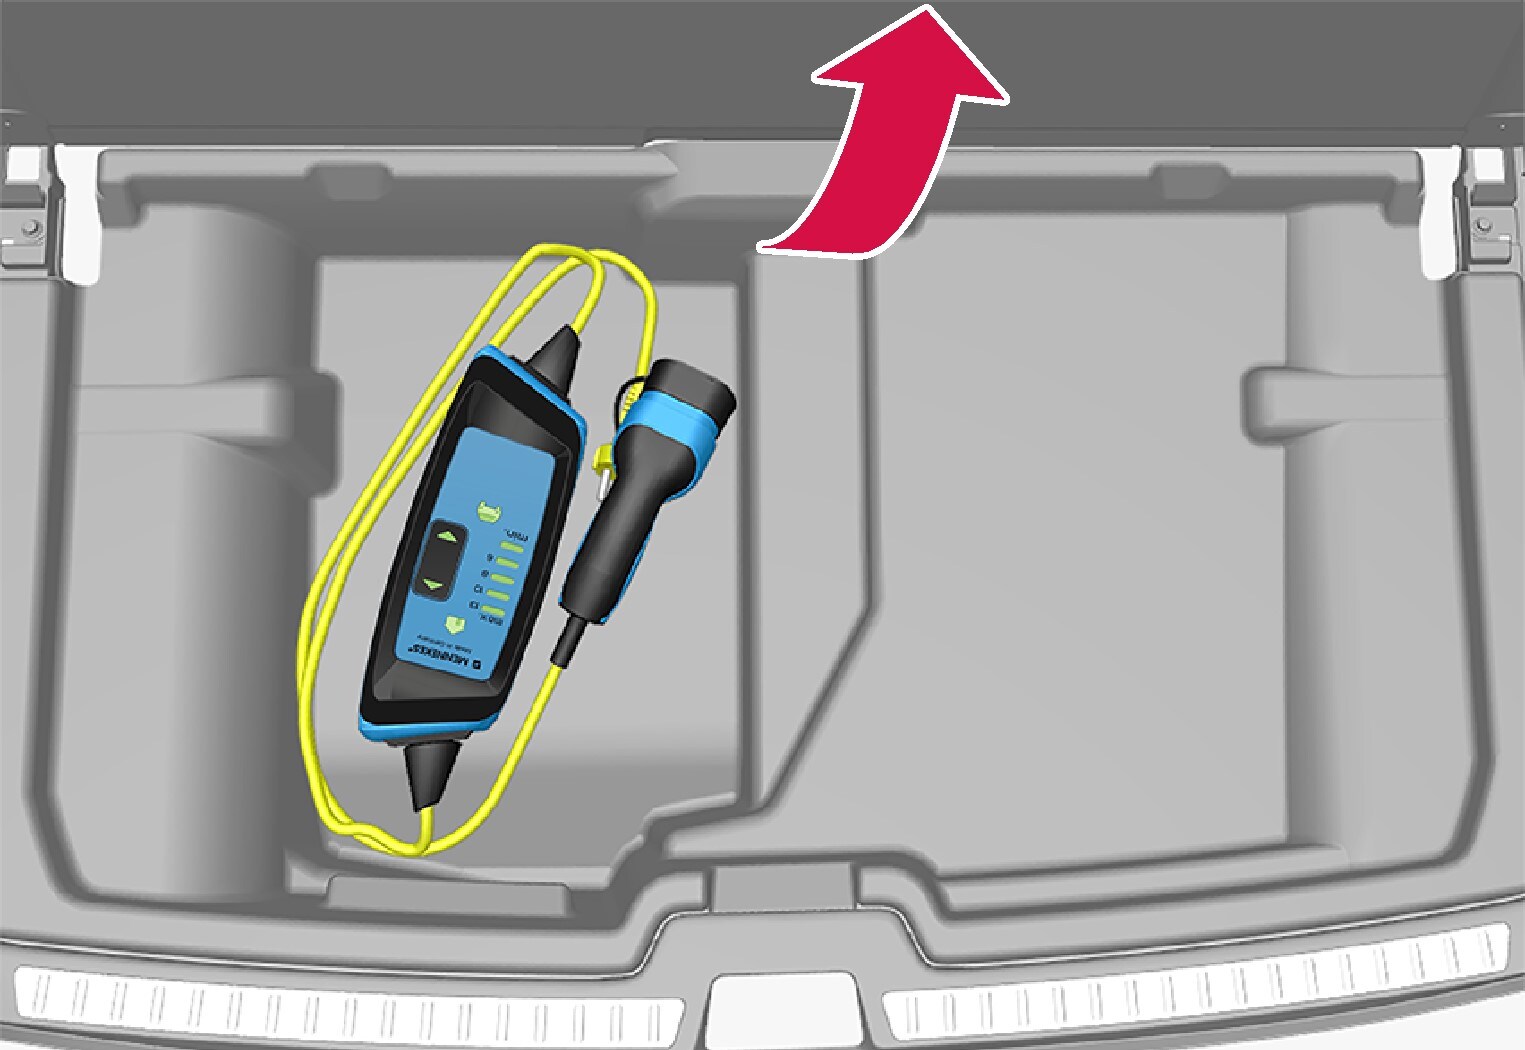 The charging cable is located in the storage compartment under the cargo area's floor cover.